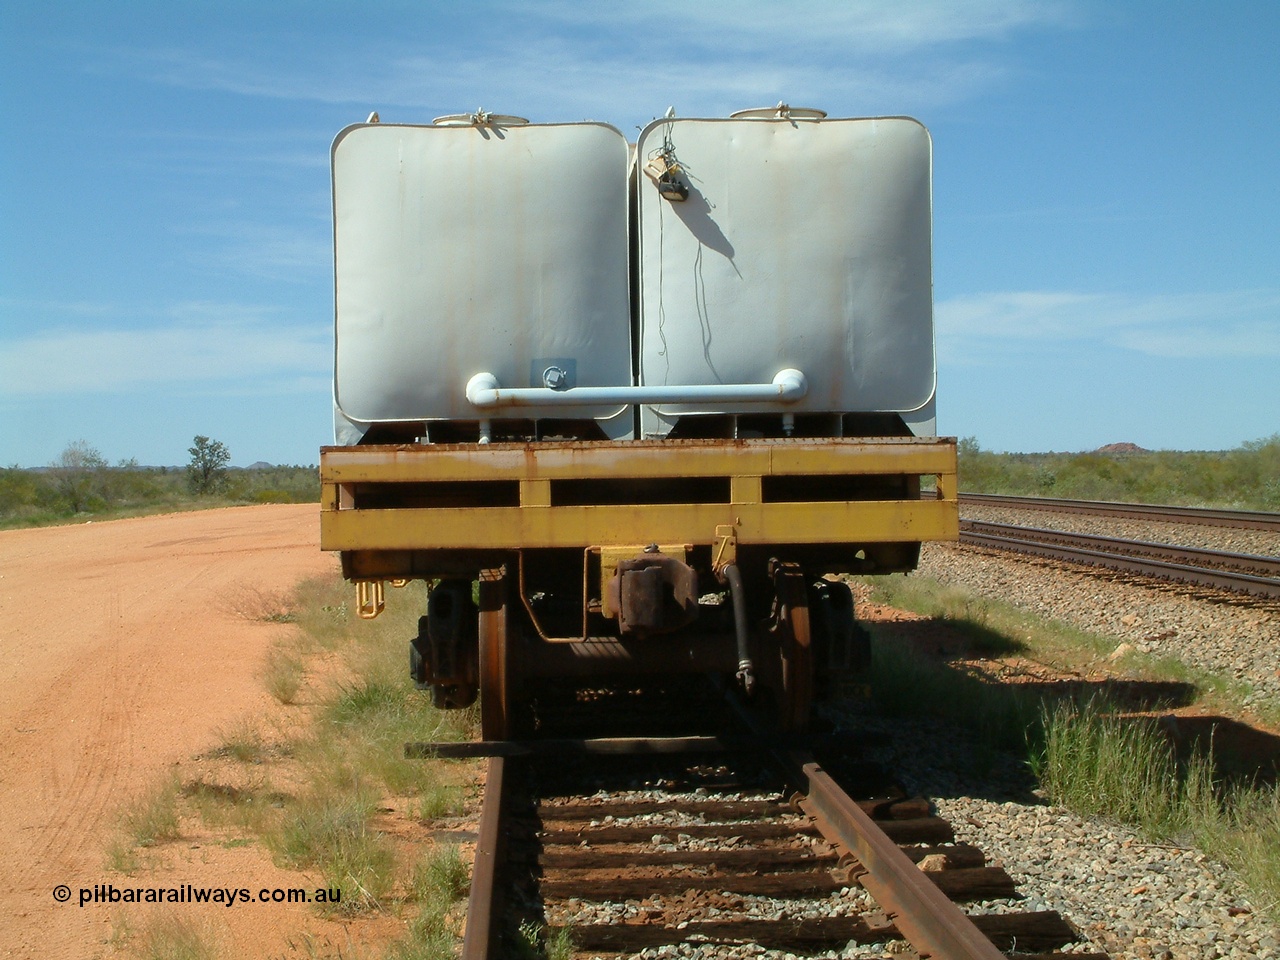 040419 102145
Abydos back track, riveted flat waggon 202 with three water tanks fitted, view of non-handbrake end, originally part of the 'camp train', modified by Mt Newman Mining railway workshops.
Keywords: BHP-flat-waggon;